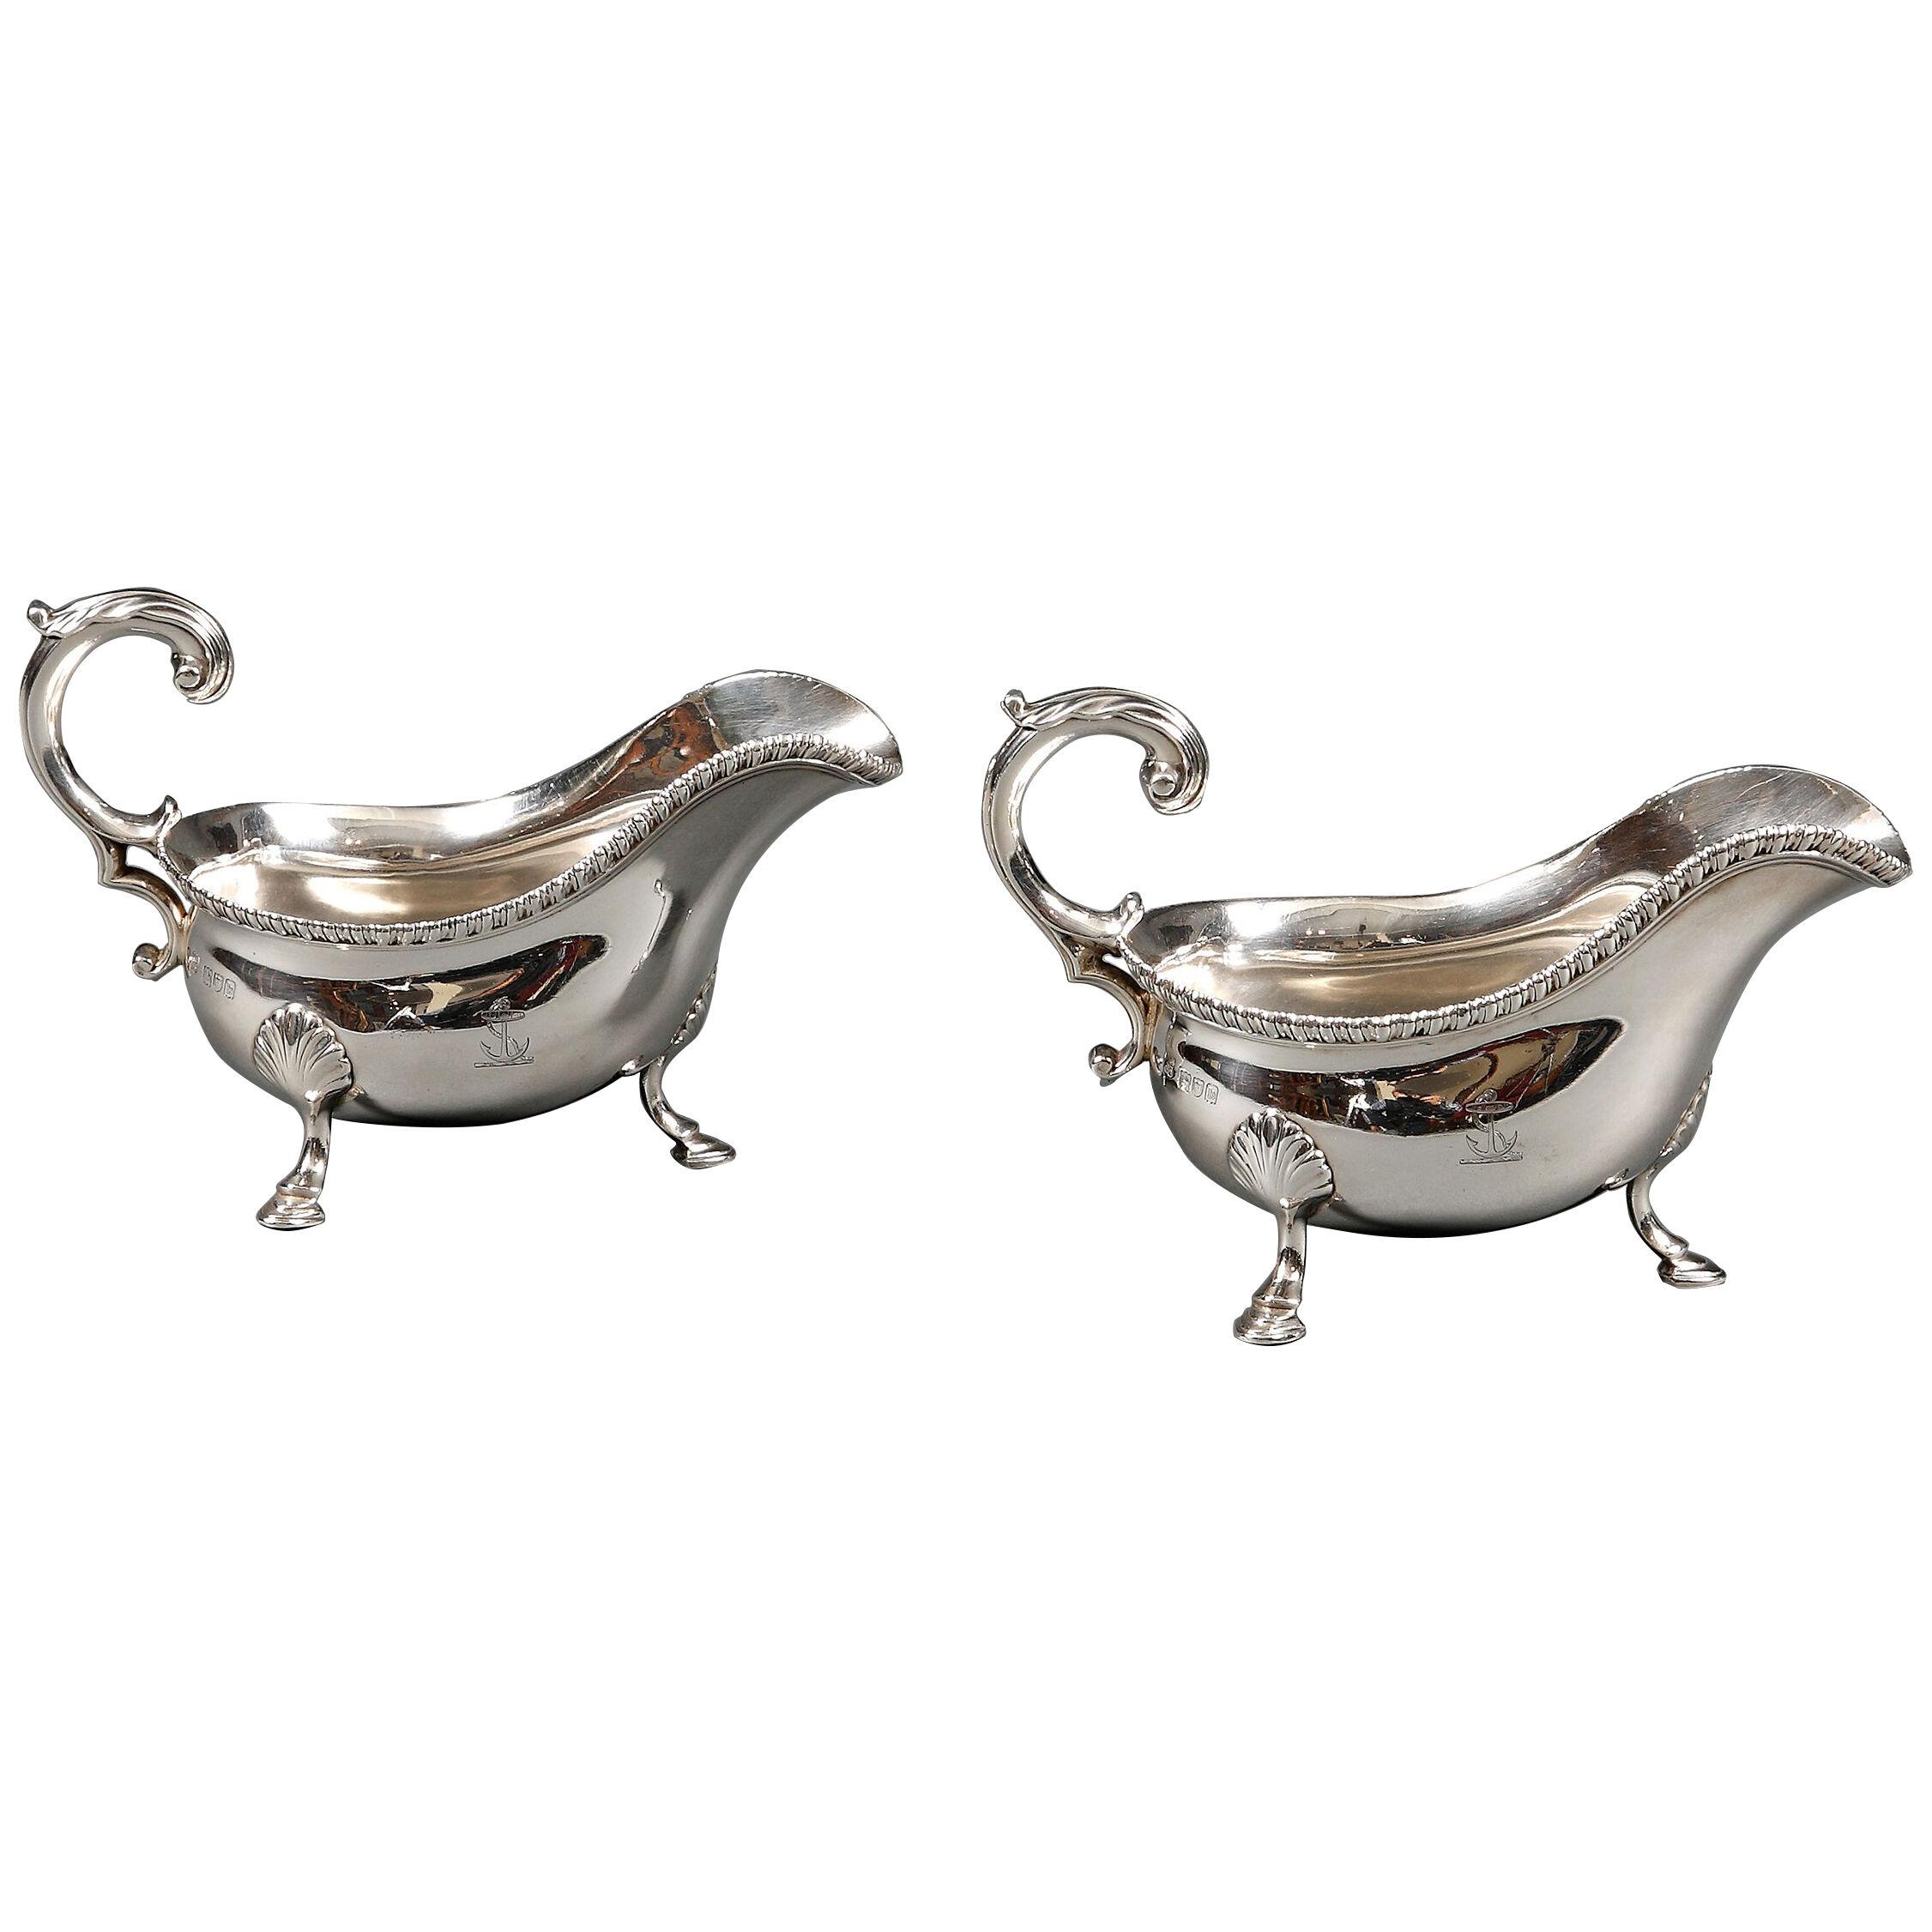 Silver sauce boats